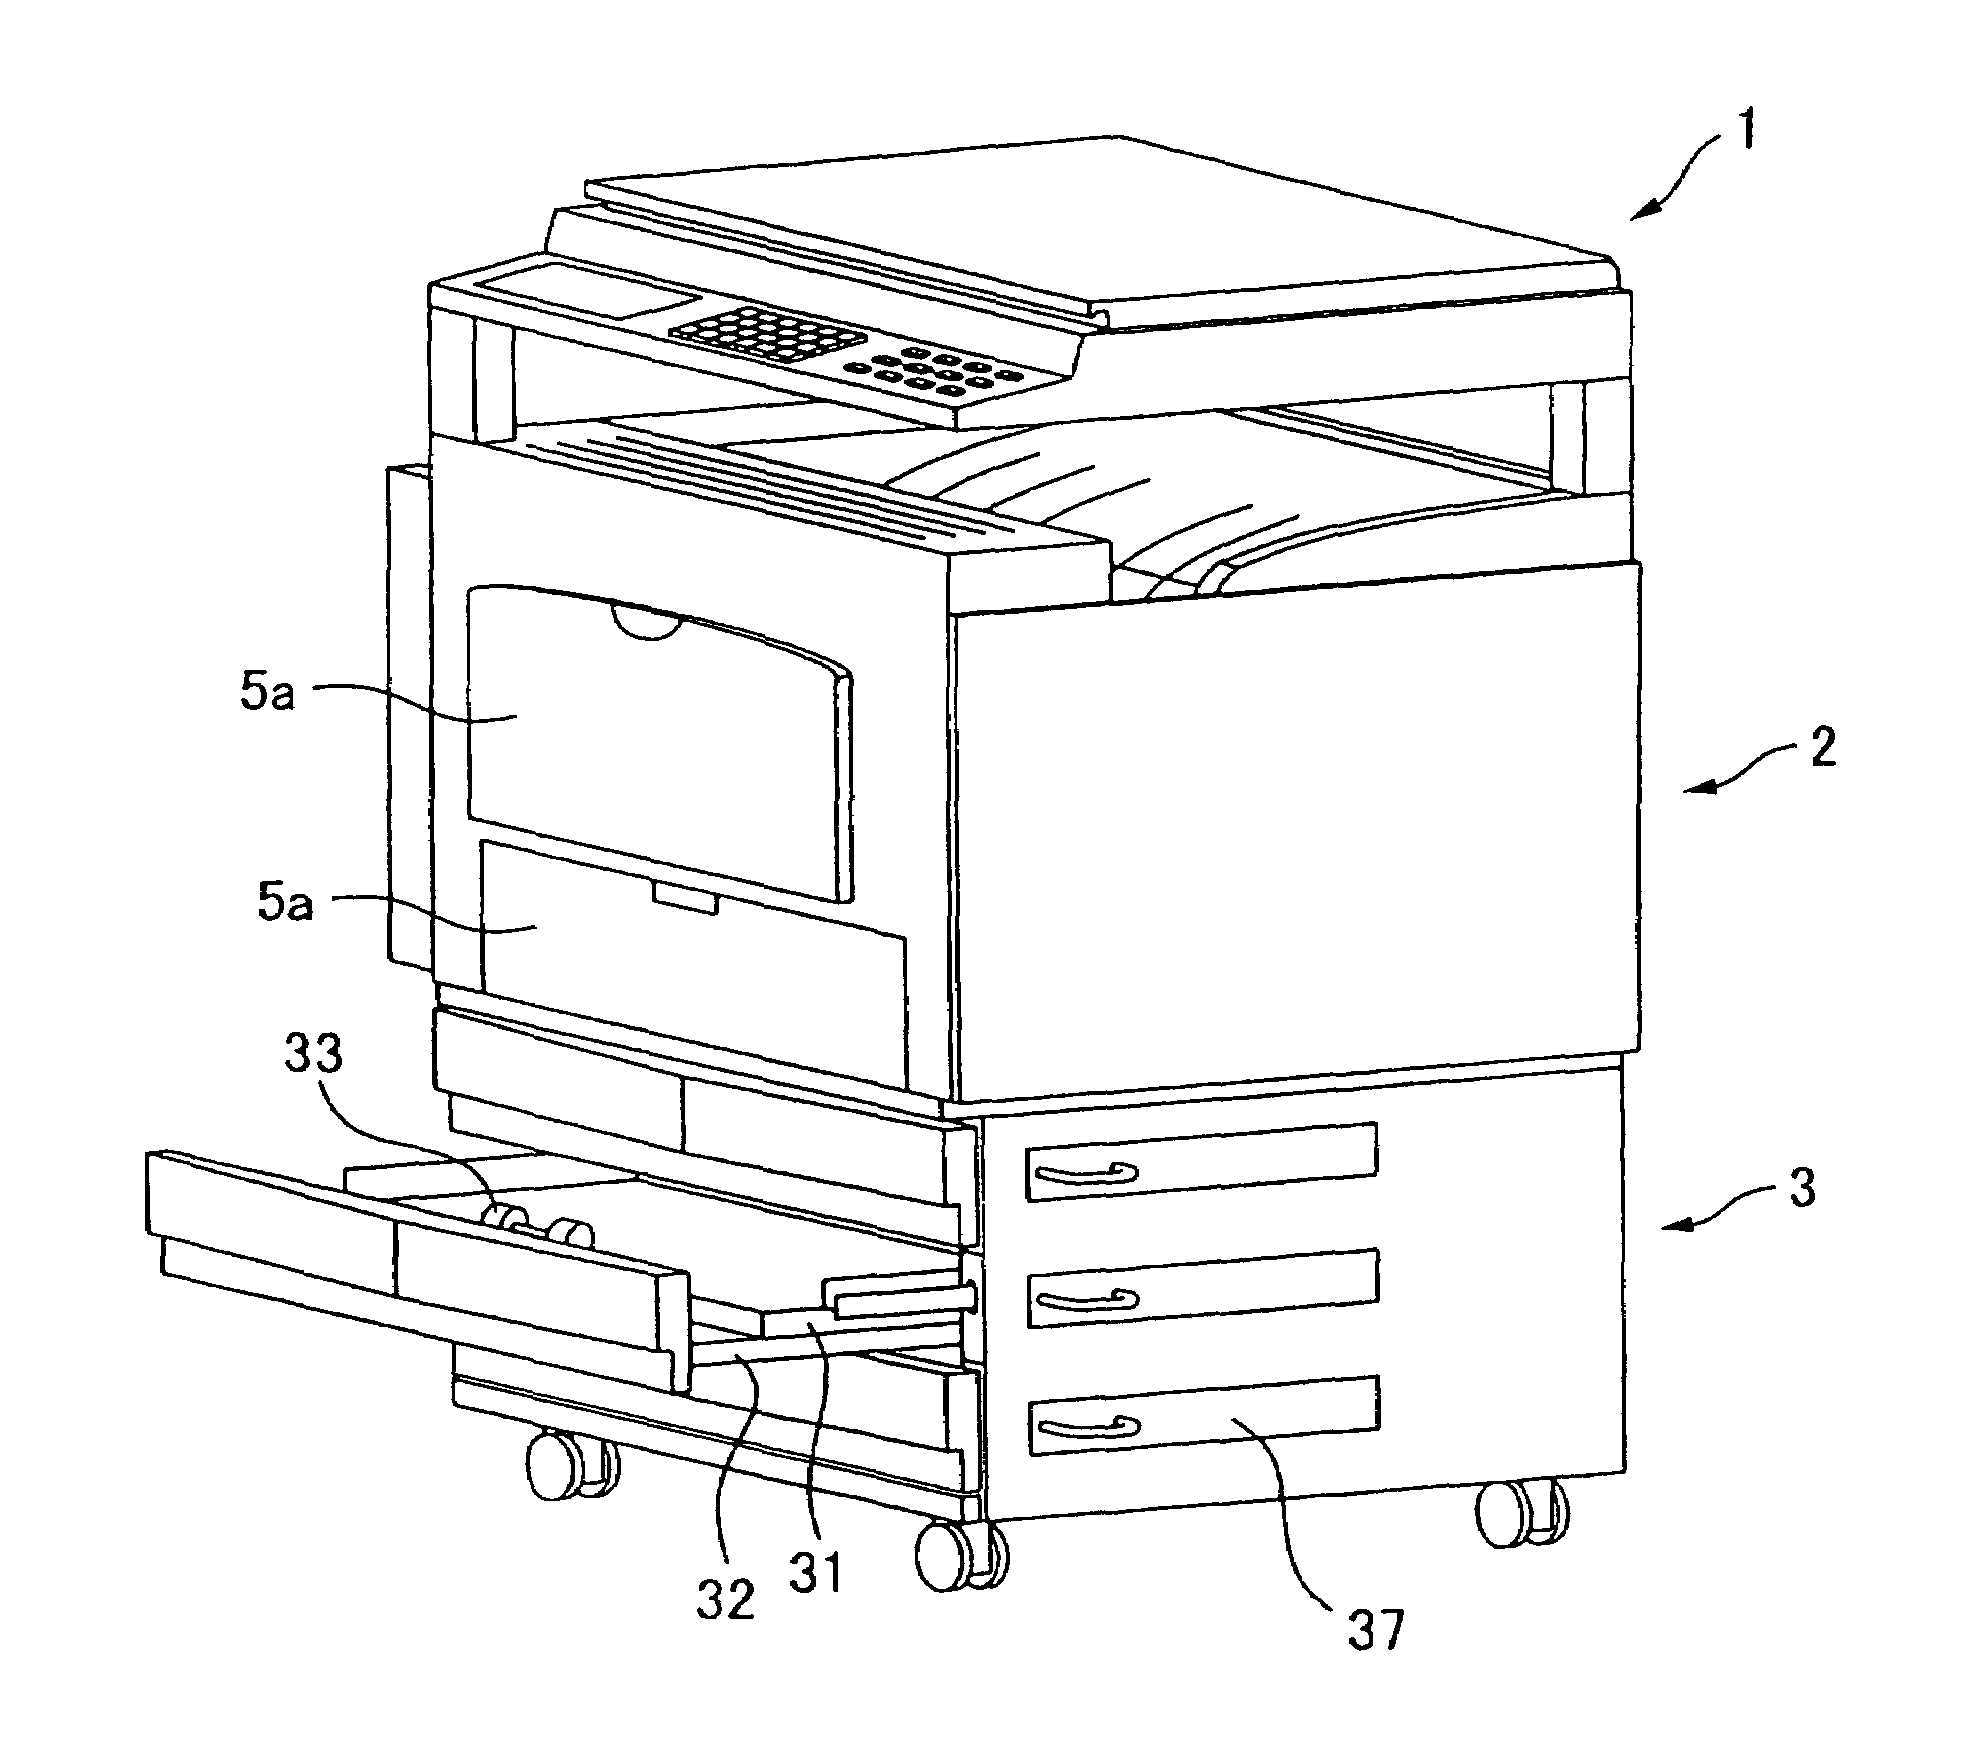 Image forming apparatus with wheelchair accessibility